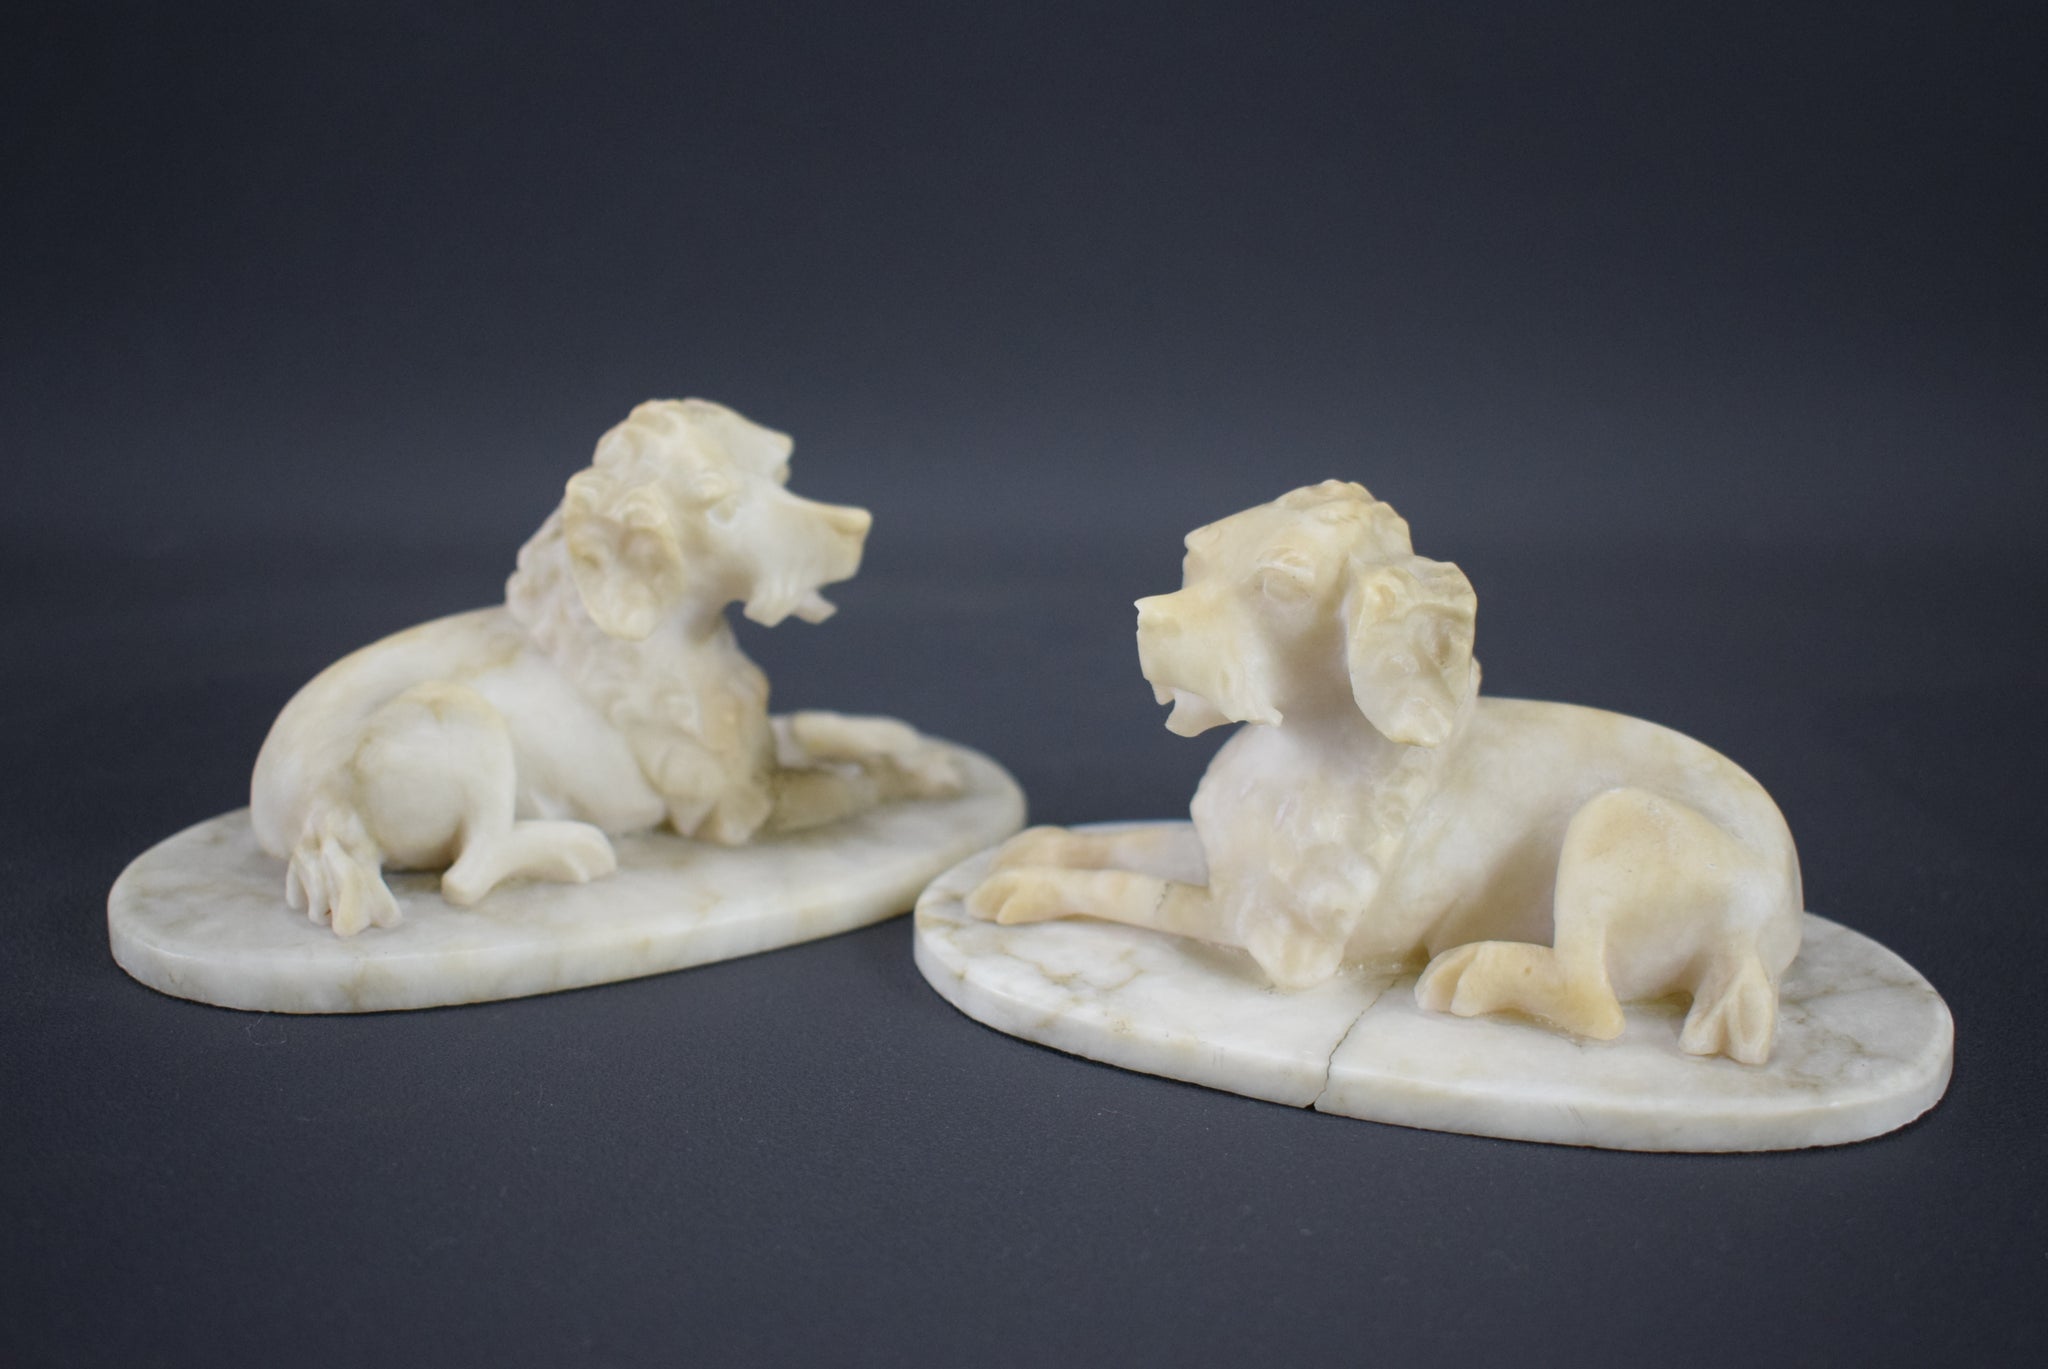 Carved Alabaster Dogs - Charmantiques